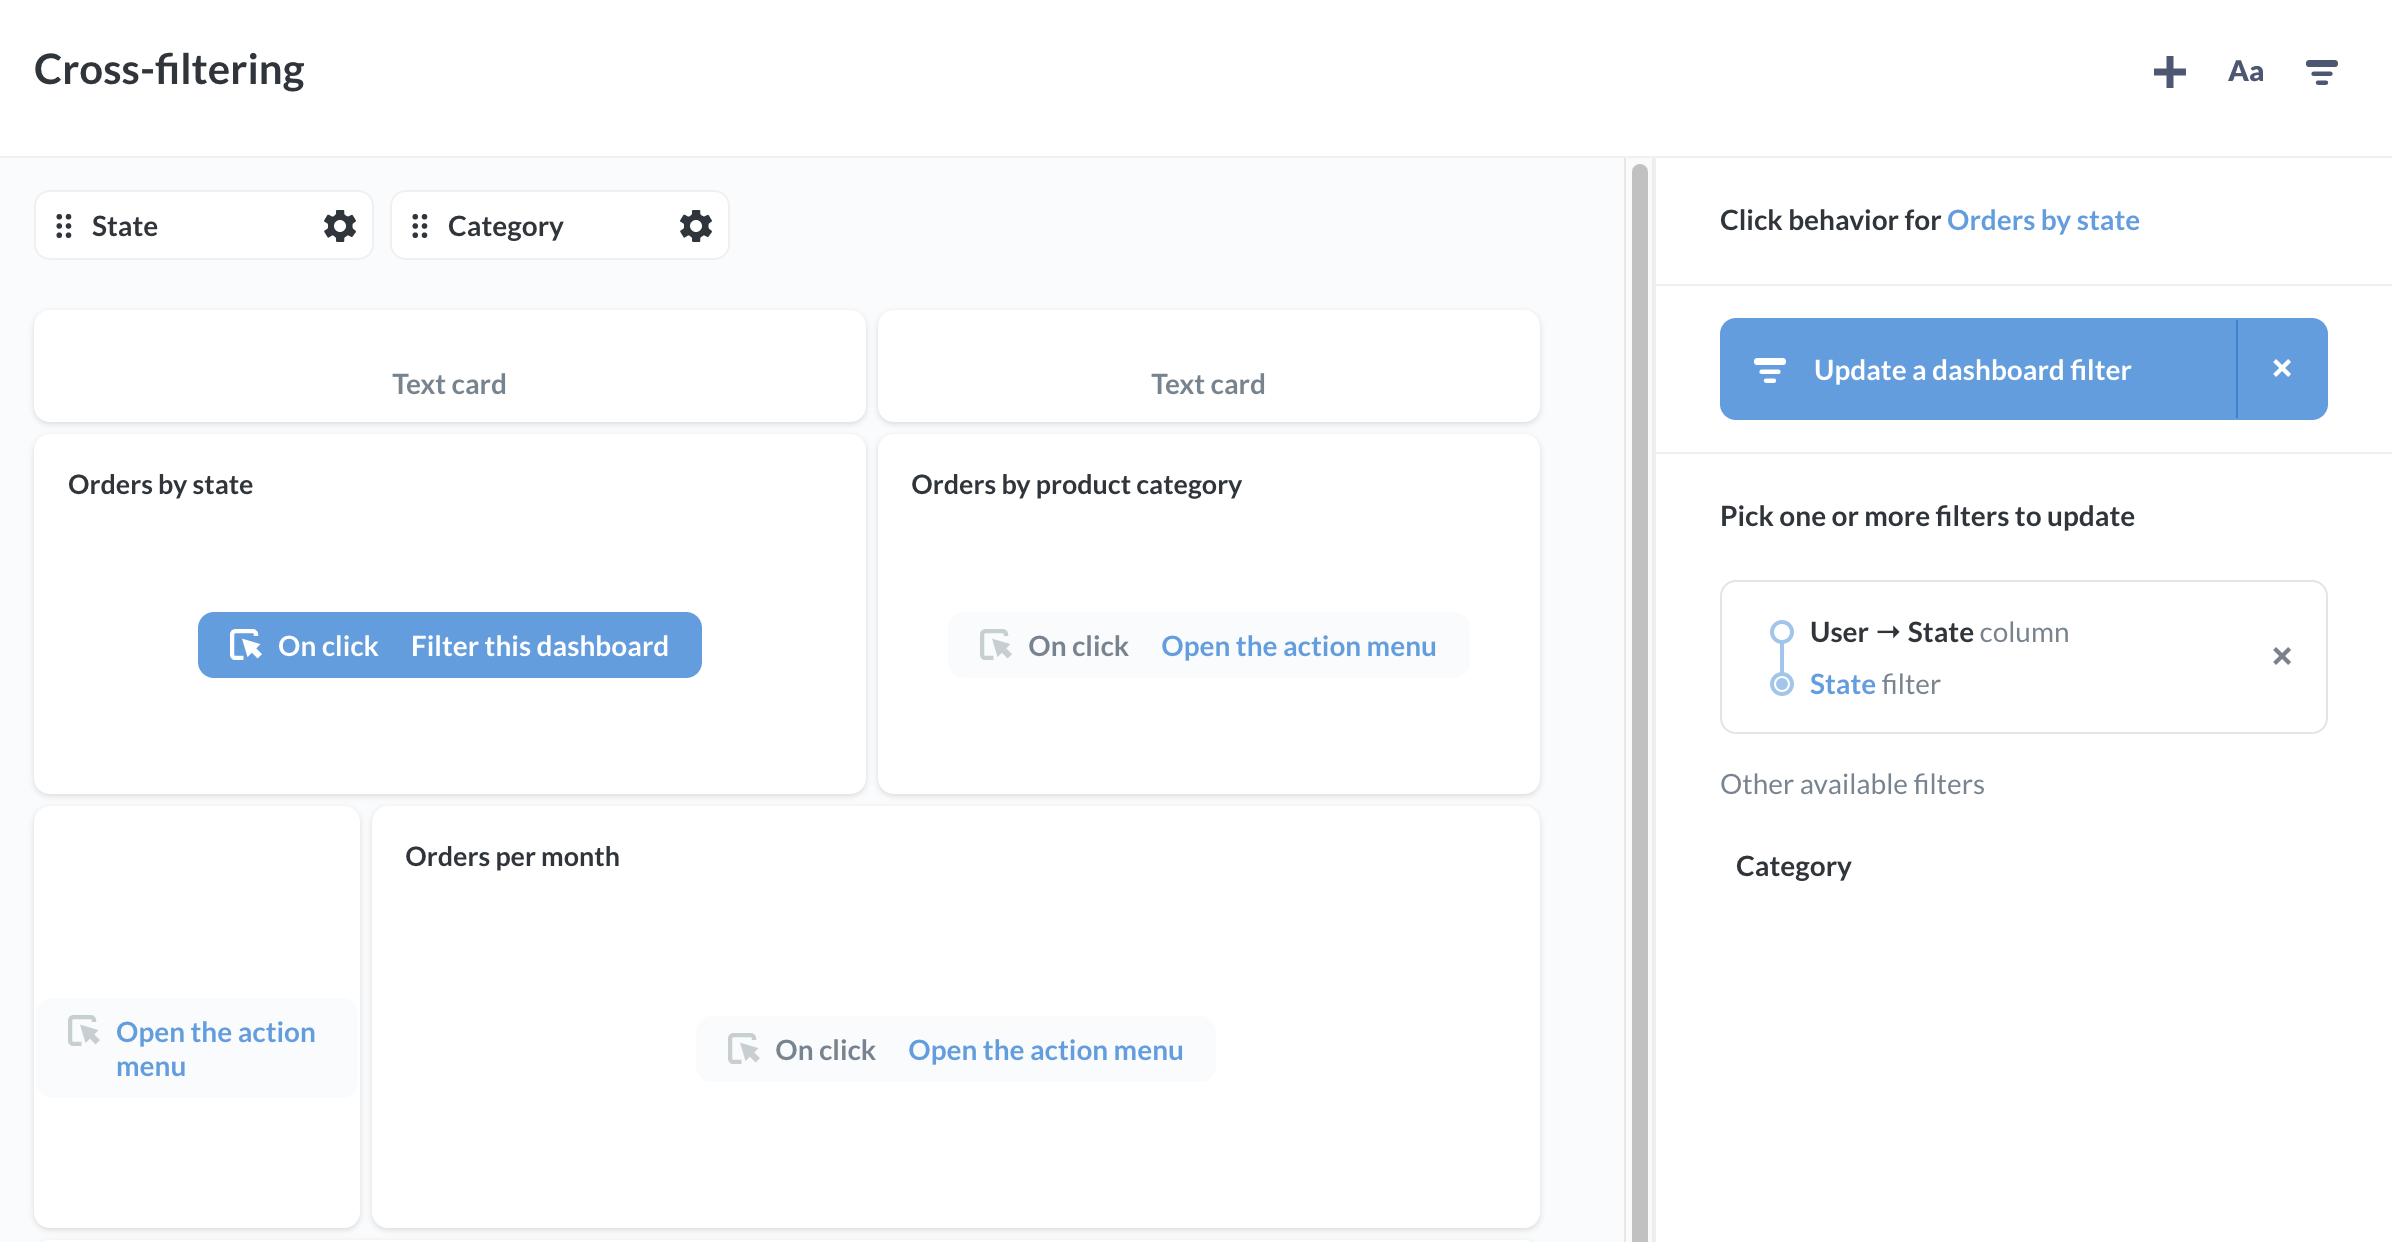 Metabase will summarize our configured click behavior: the Orders by State card will update a dashboard filter by passing the value from the User→State column to the dashboard